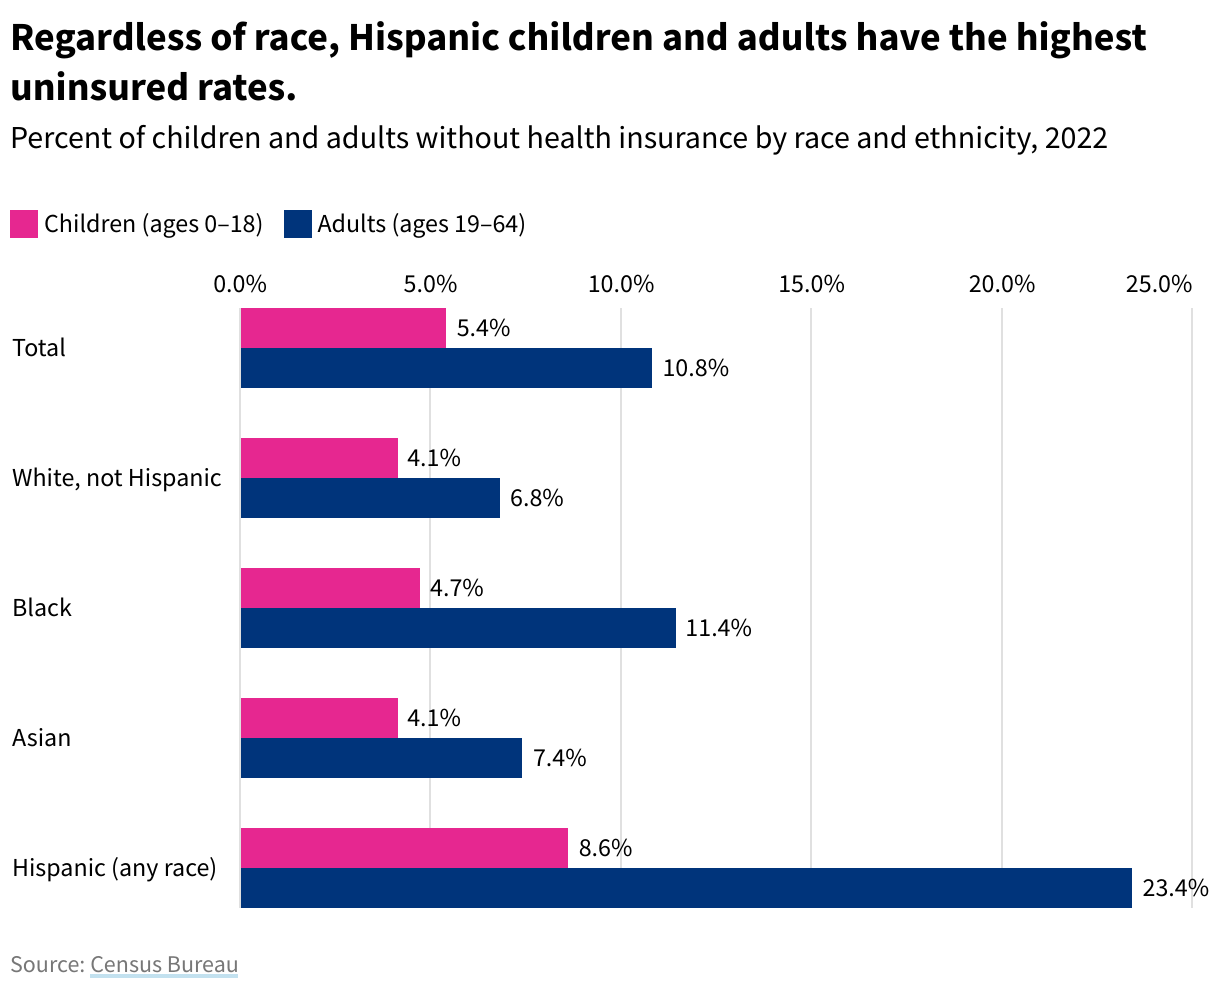 Bar chart showing the uninsured rates for children and adults by race and ethnicity in 2022. Hispanic children and adults of any race had the highest uninsured rates.